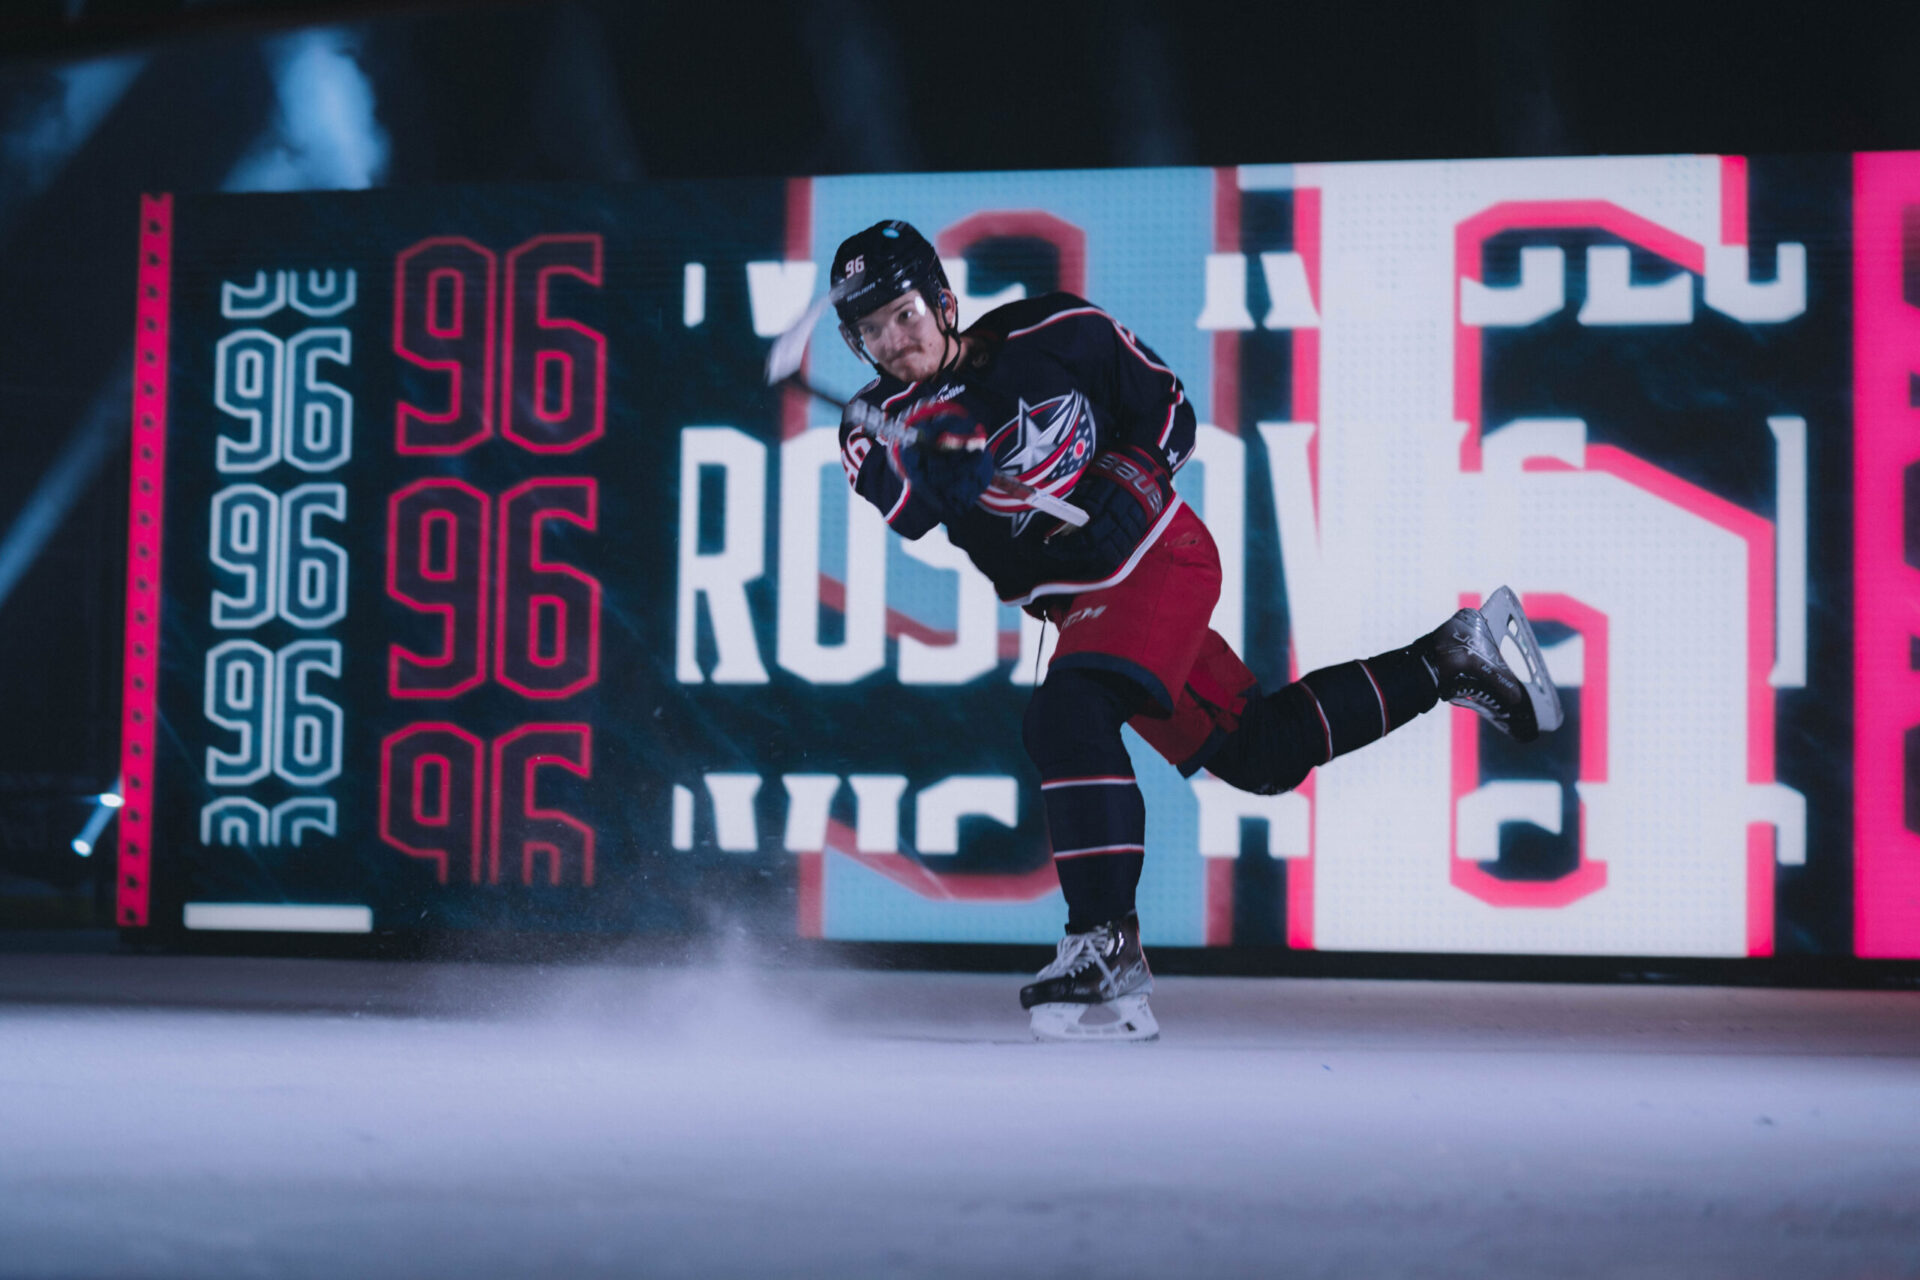 A hockey player in a red and blue uniform skating out with smoke around and a digital backdrop with the number '96'.